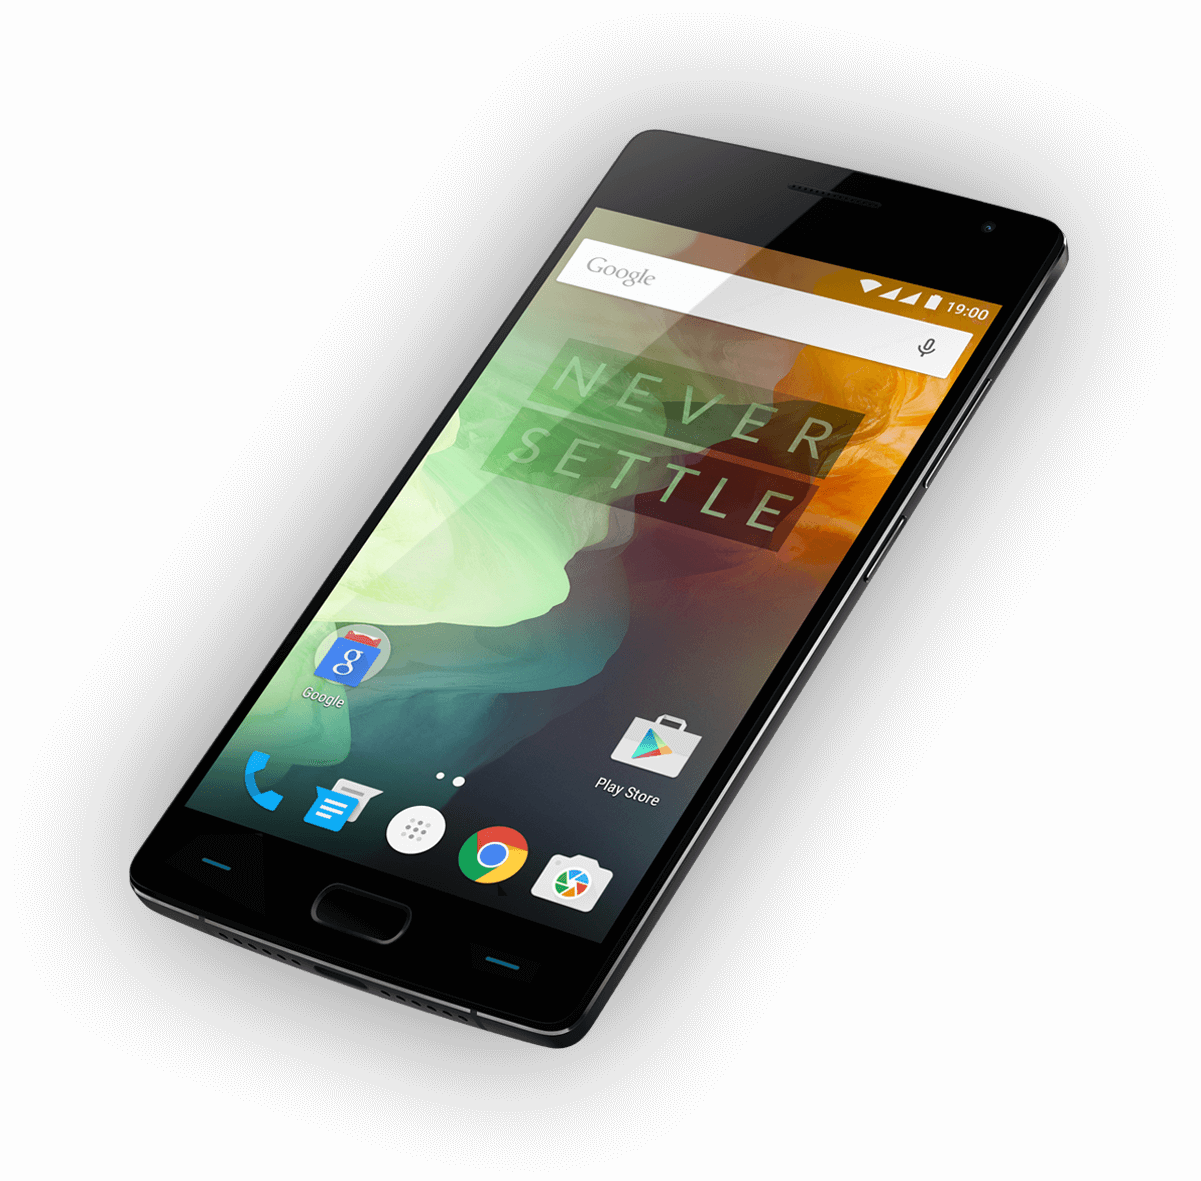 OnePlus 2 Available Black Friday With No Invite – ClintonFitch.com - Will One Plus Have Black Friday Deal